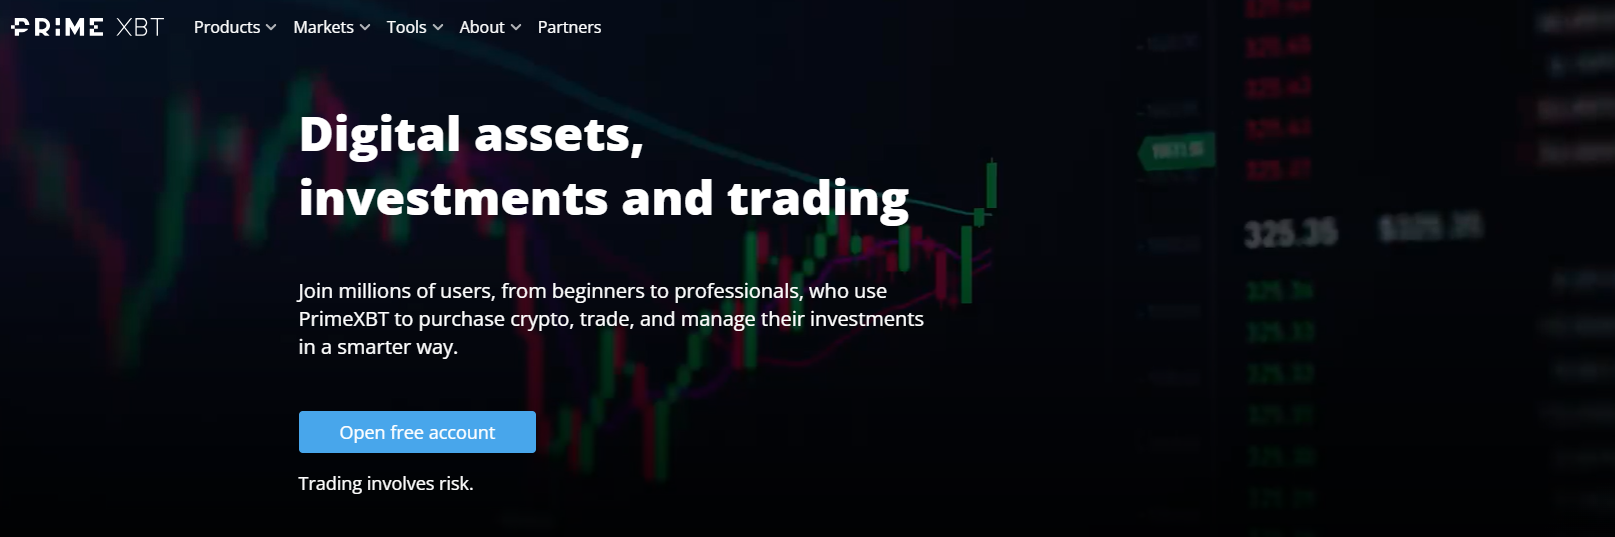 How To Save Money with Trading Platform PrimeXBT?